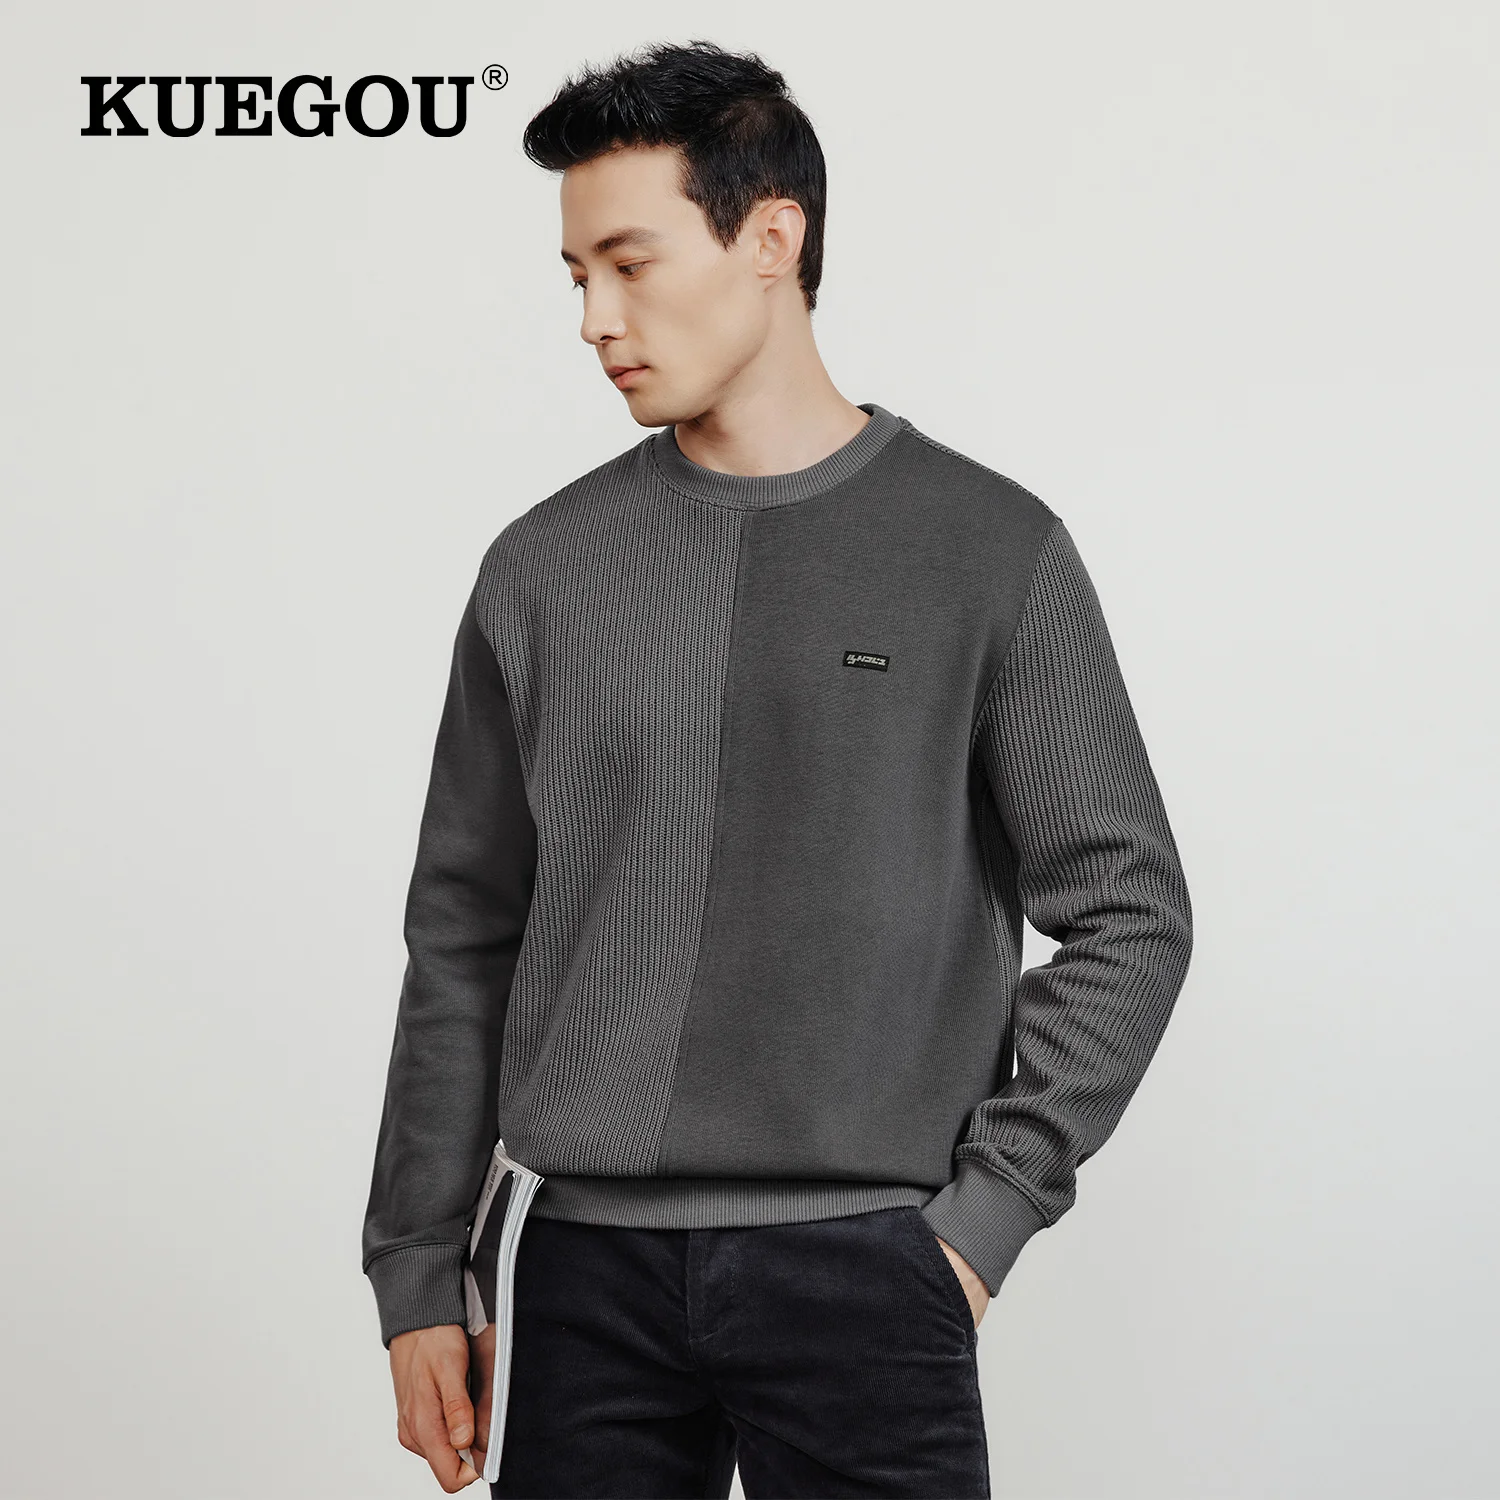 KUEGOU 2022 Autumn Cotton Letter Plain Black Gray Sweater Men Pullover Casual Jumper For Male Wear Brand Knitted Clothes 55062